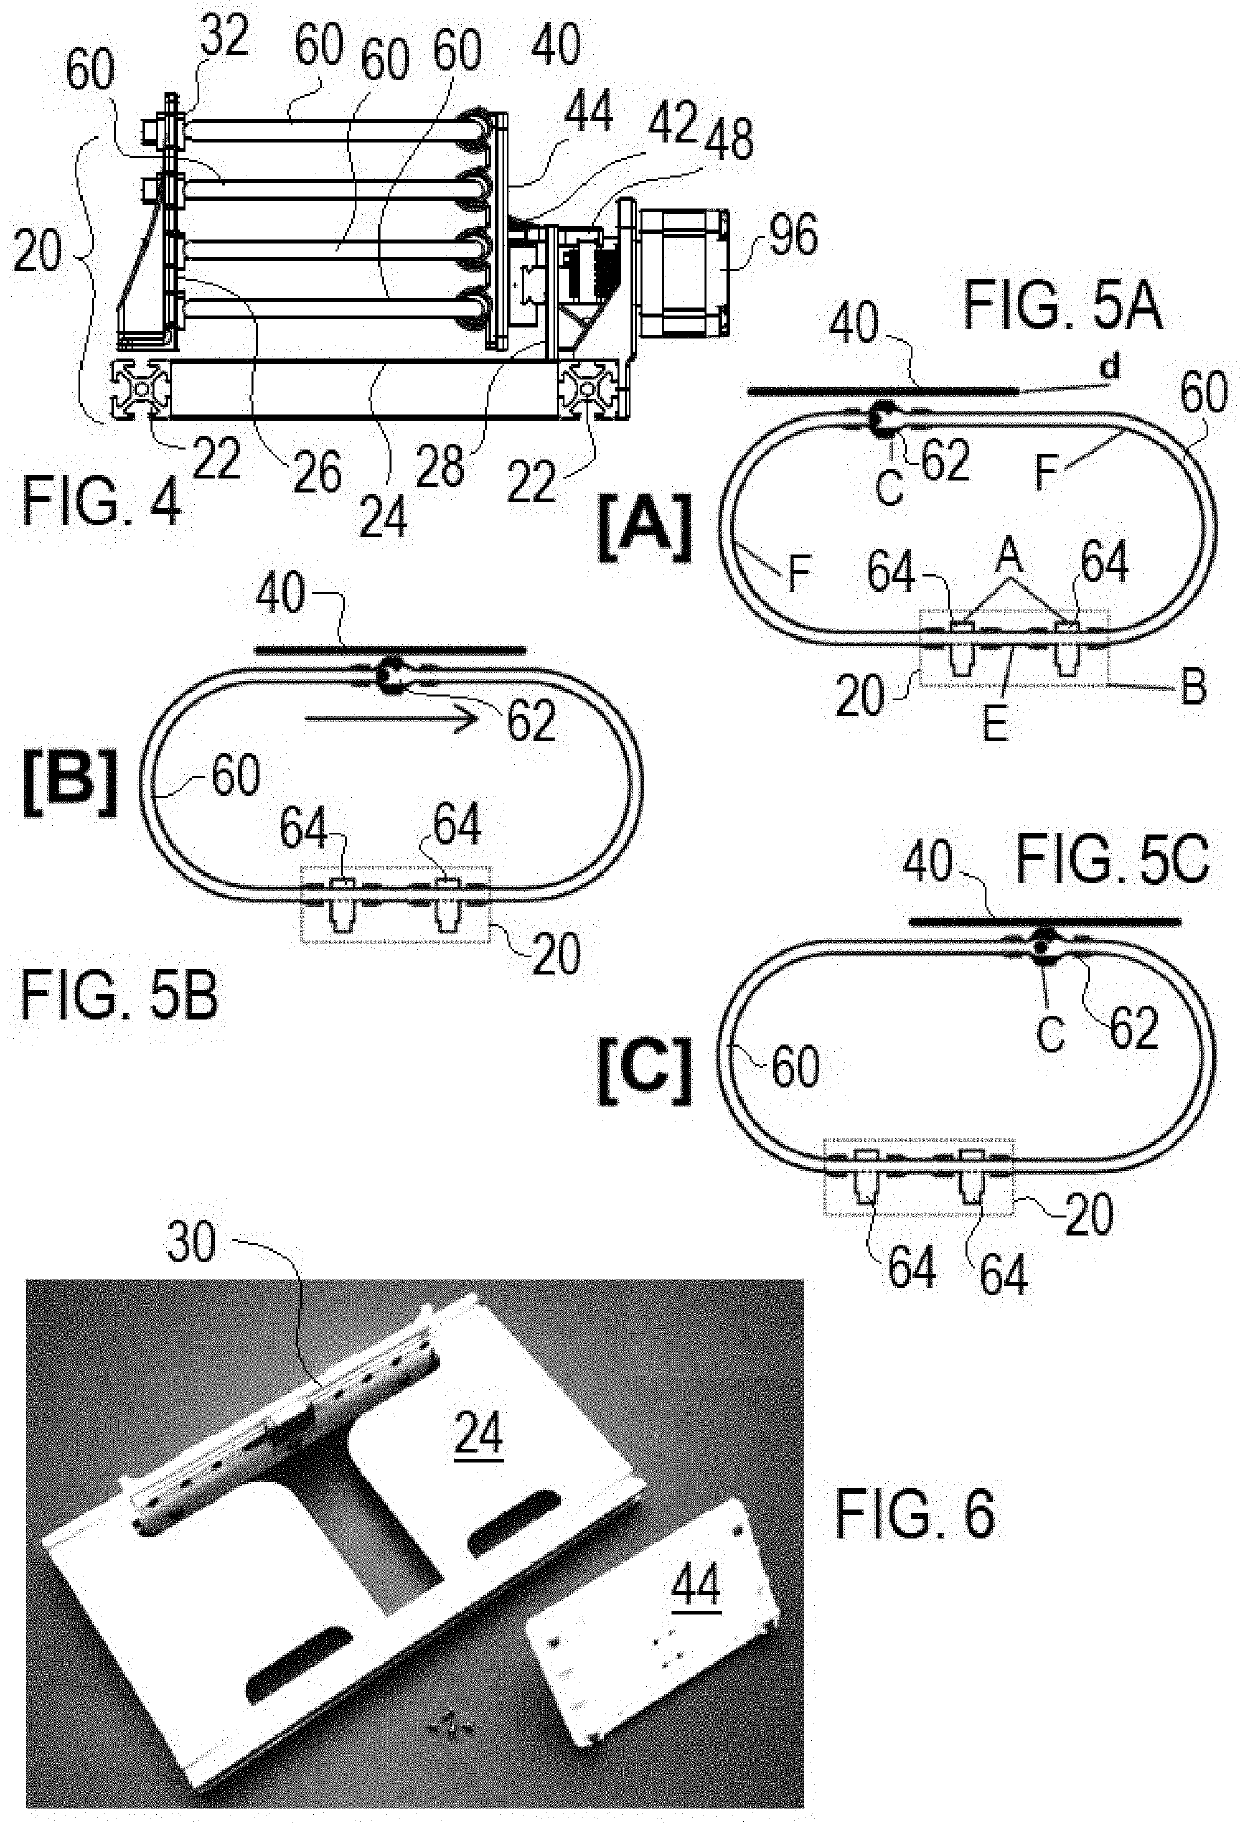 Flow Based Biological Testing Platform and Noncircular Fluid Test Loops Therefor